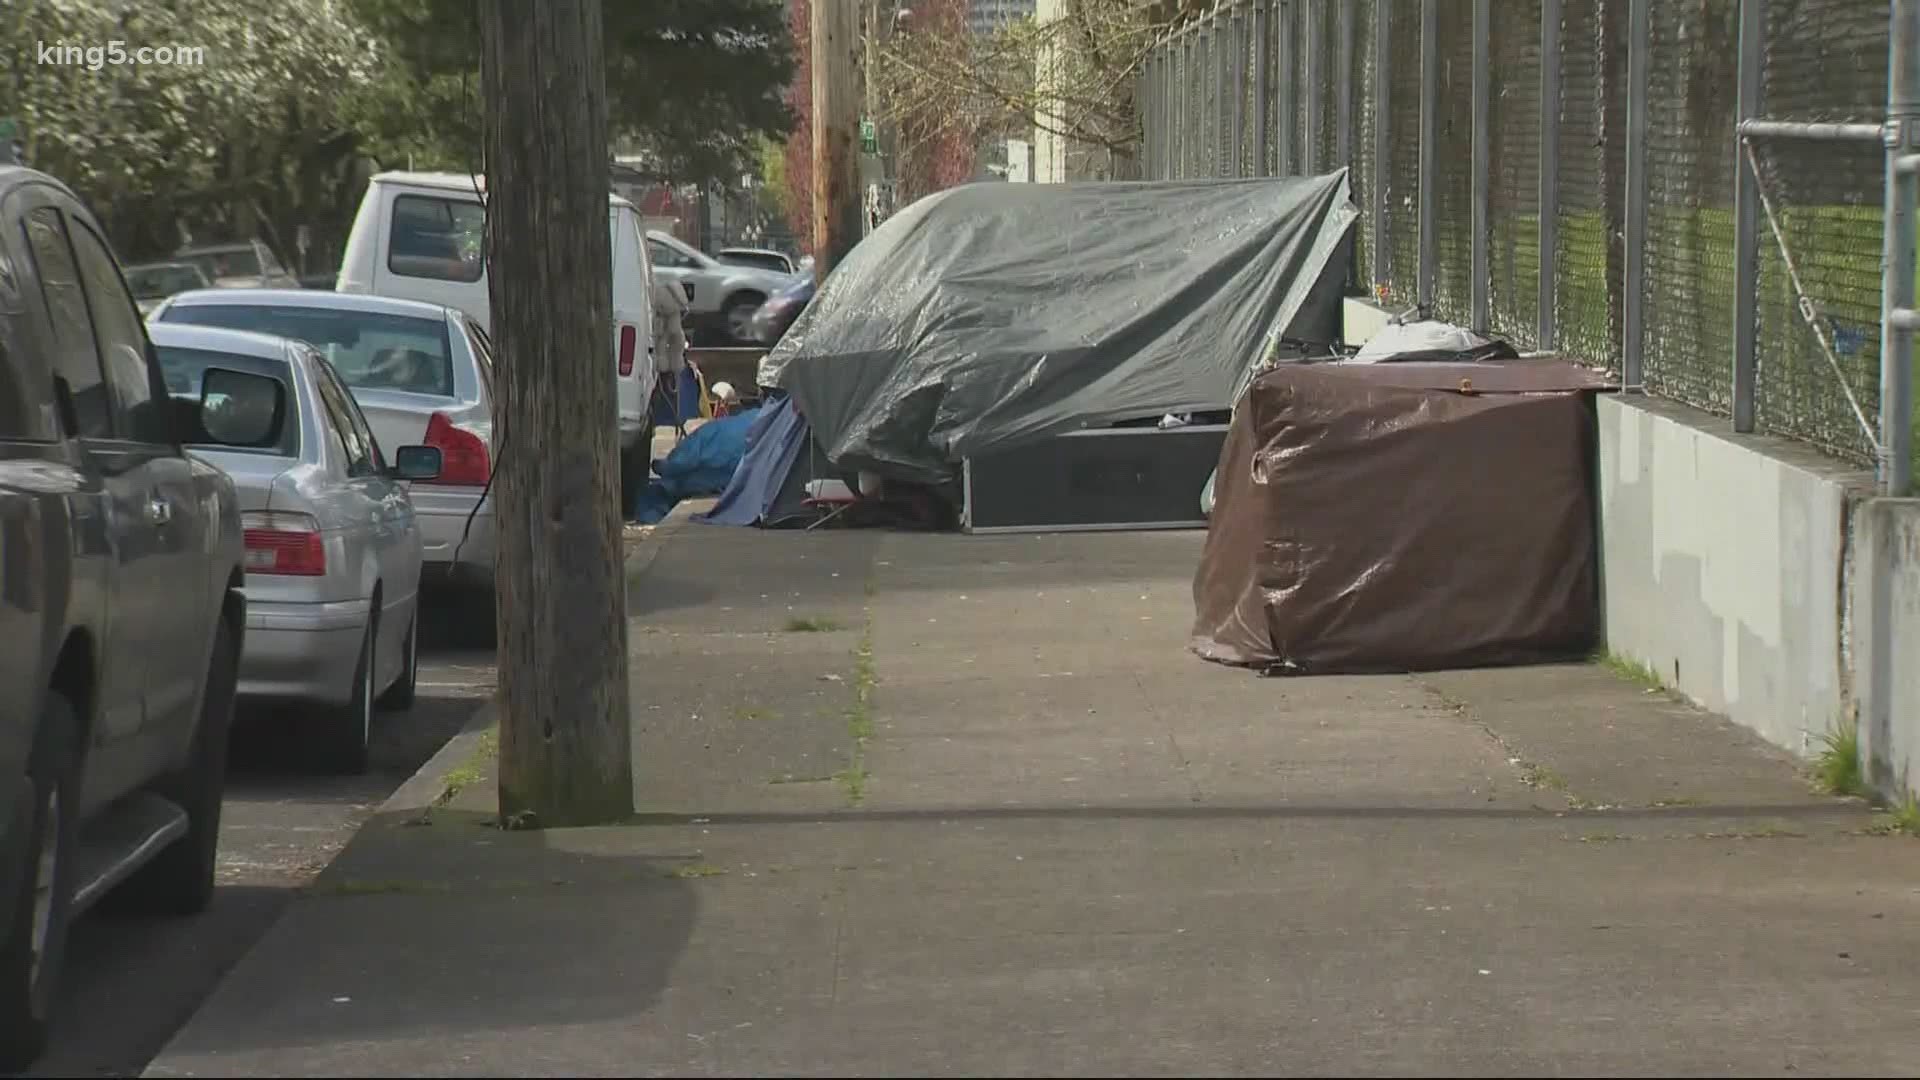 King County reports 27 people tested positive for coronavirus at homeless shelters. Advocacy groups say increased space and testing will help keep people safe.